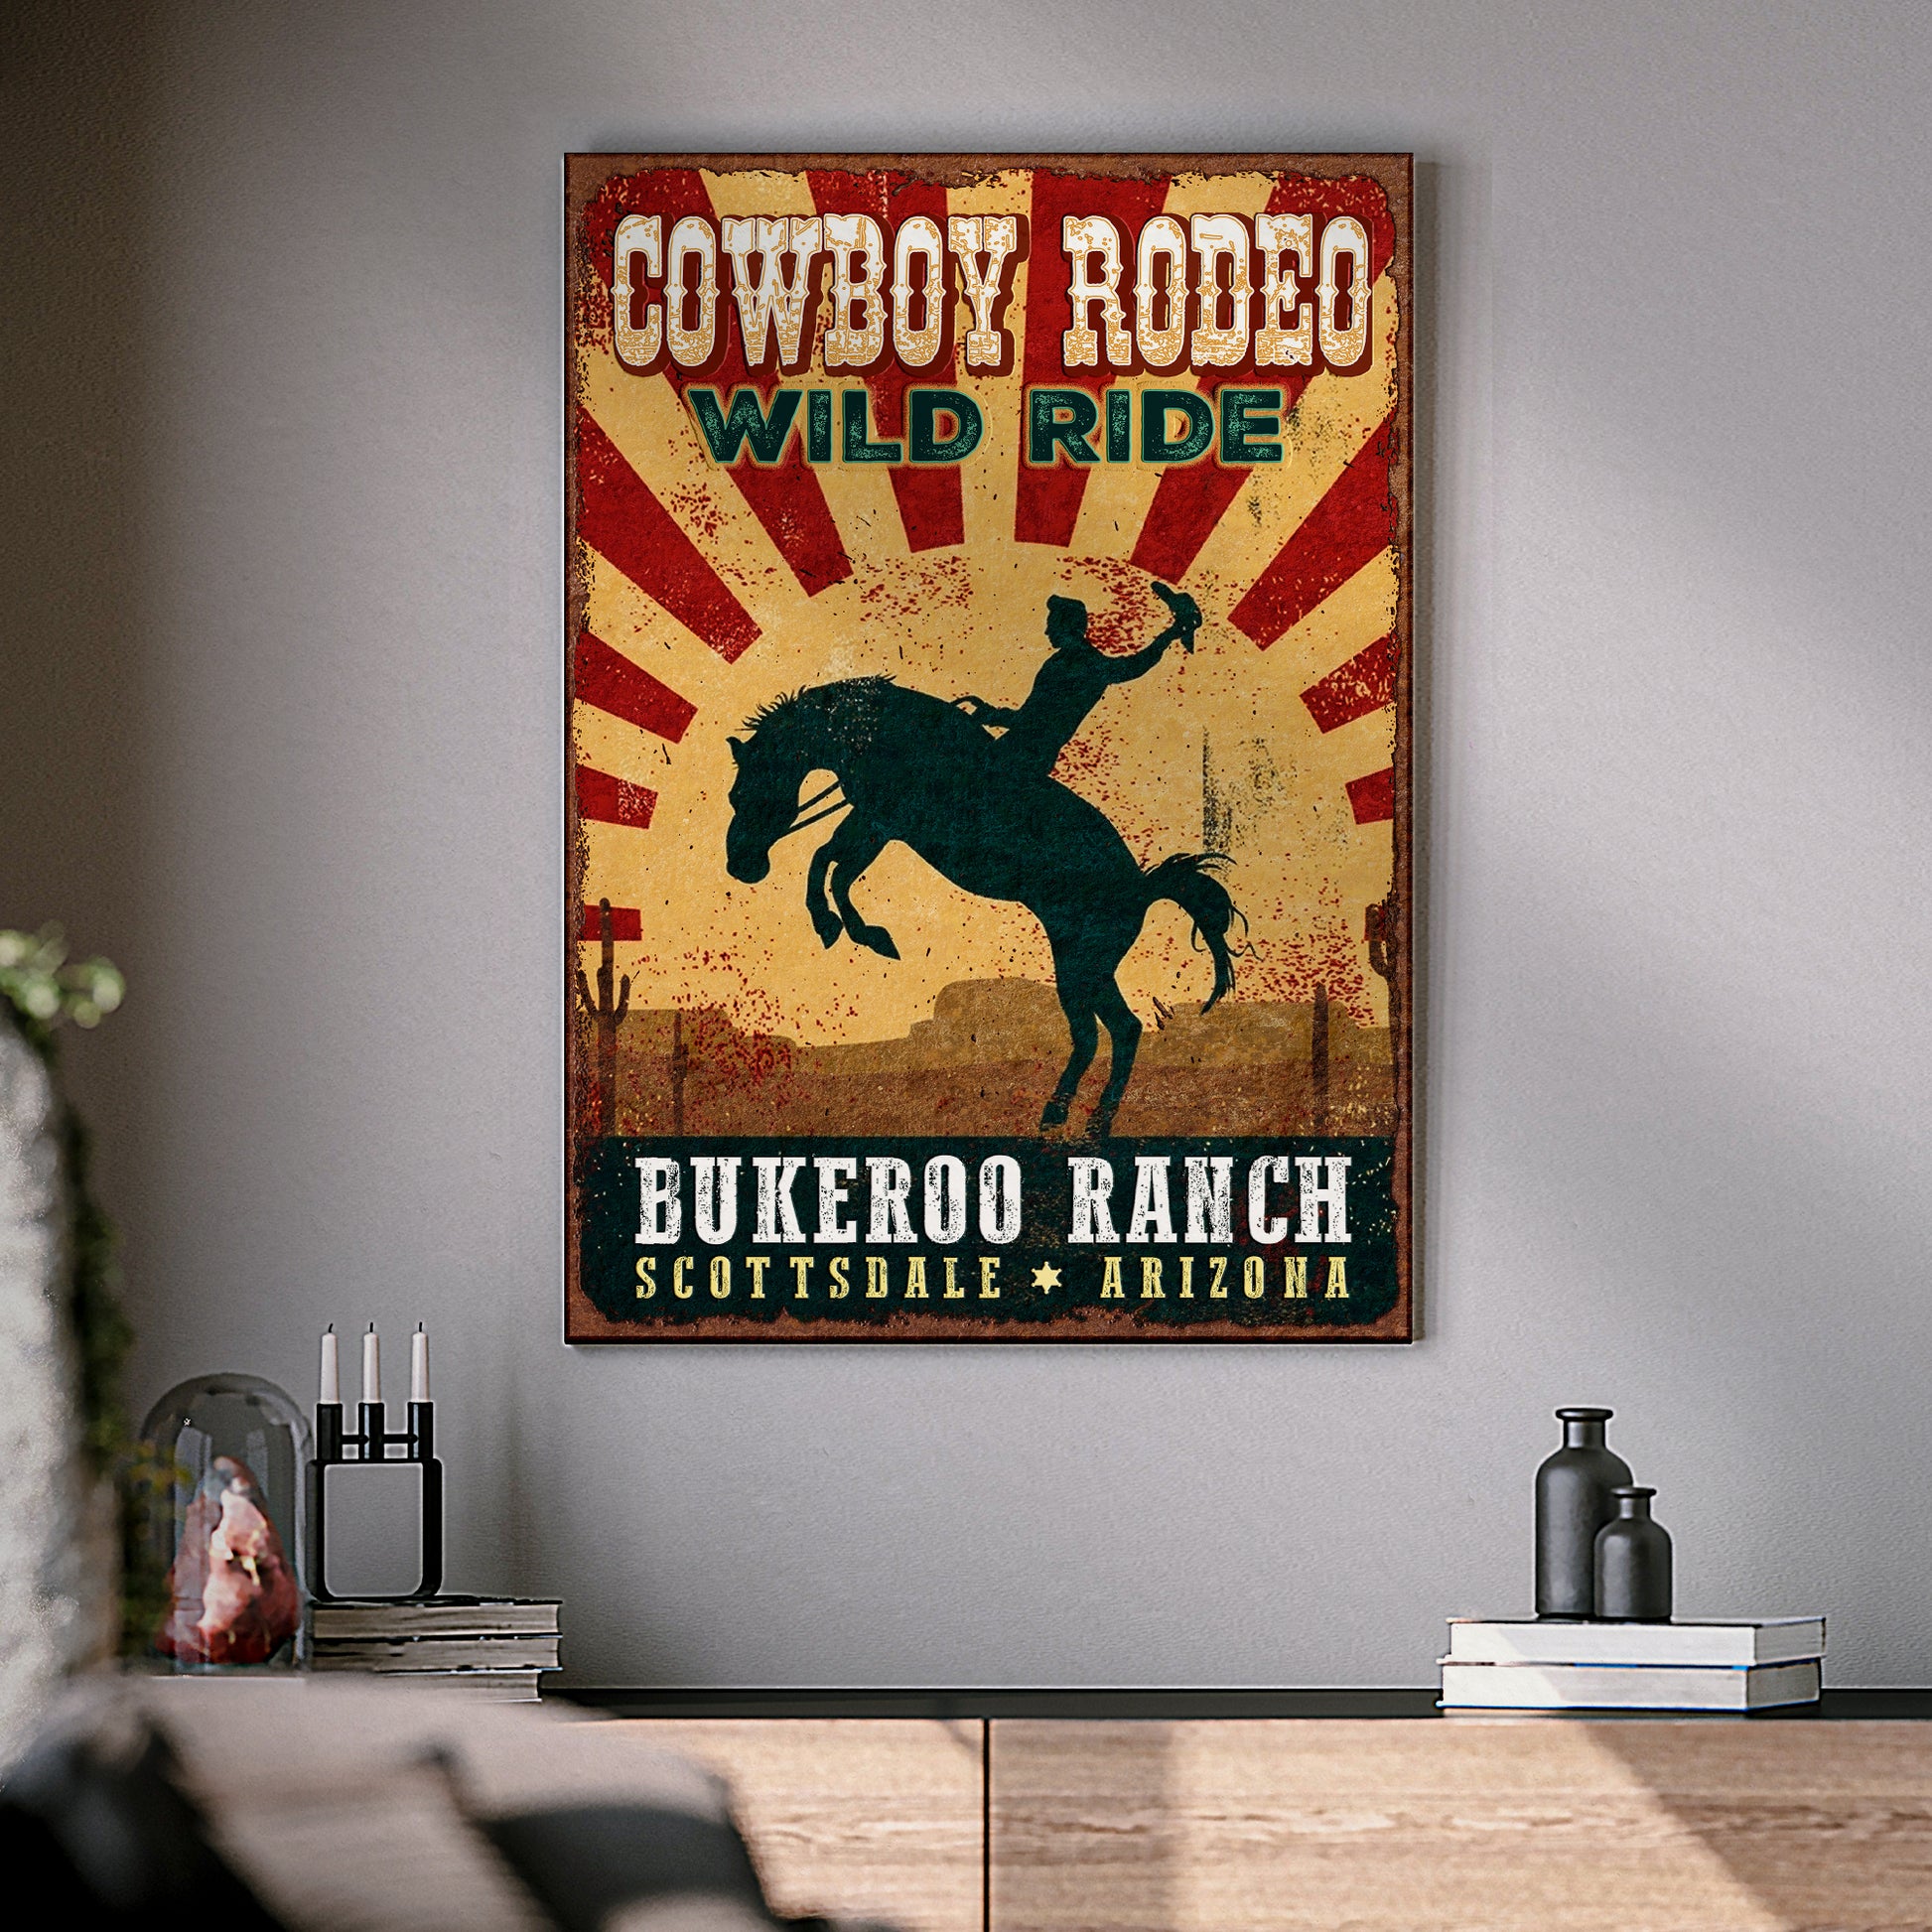 Cowboy Rodeo Wild Ride Show Sign - Image by Tailored Canvases